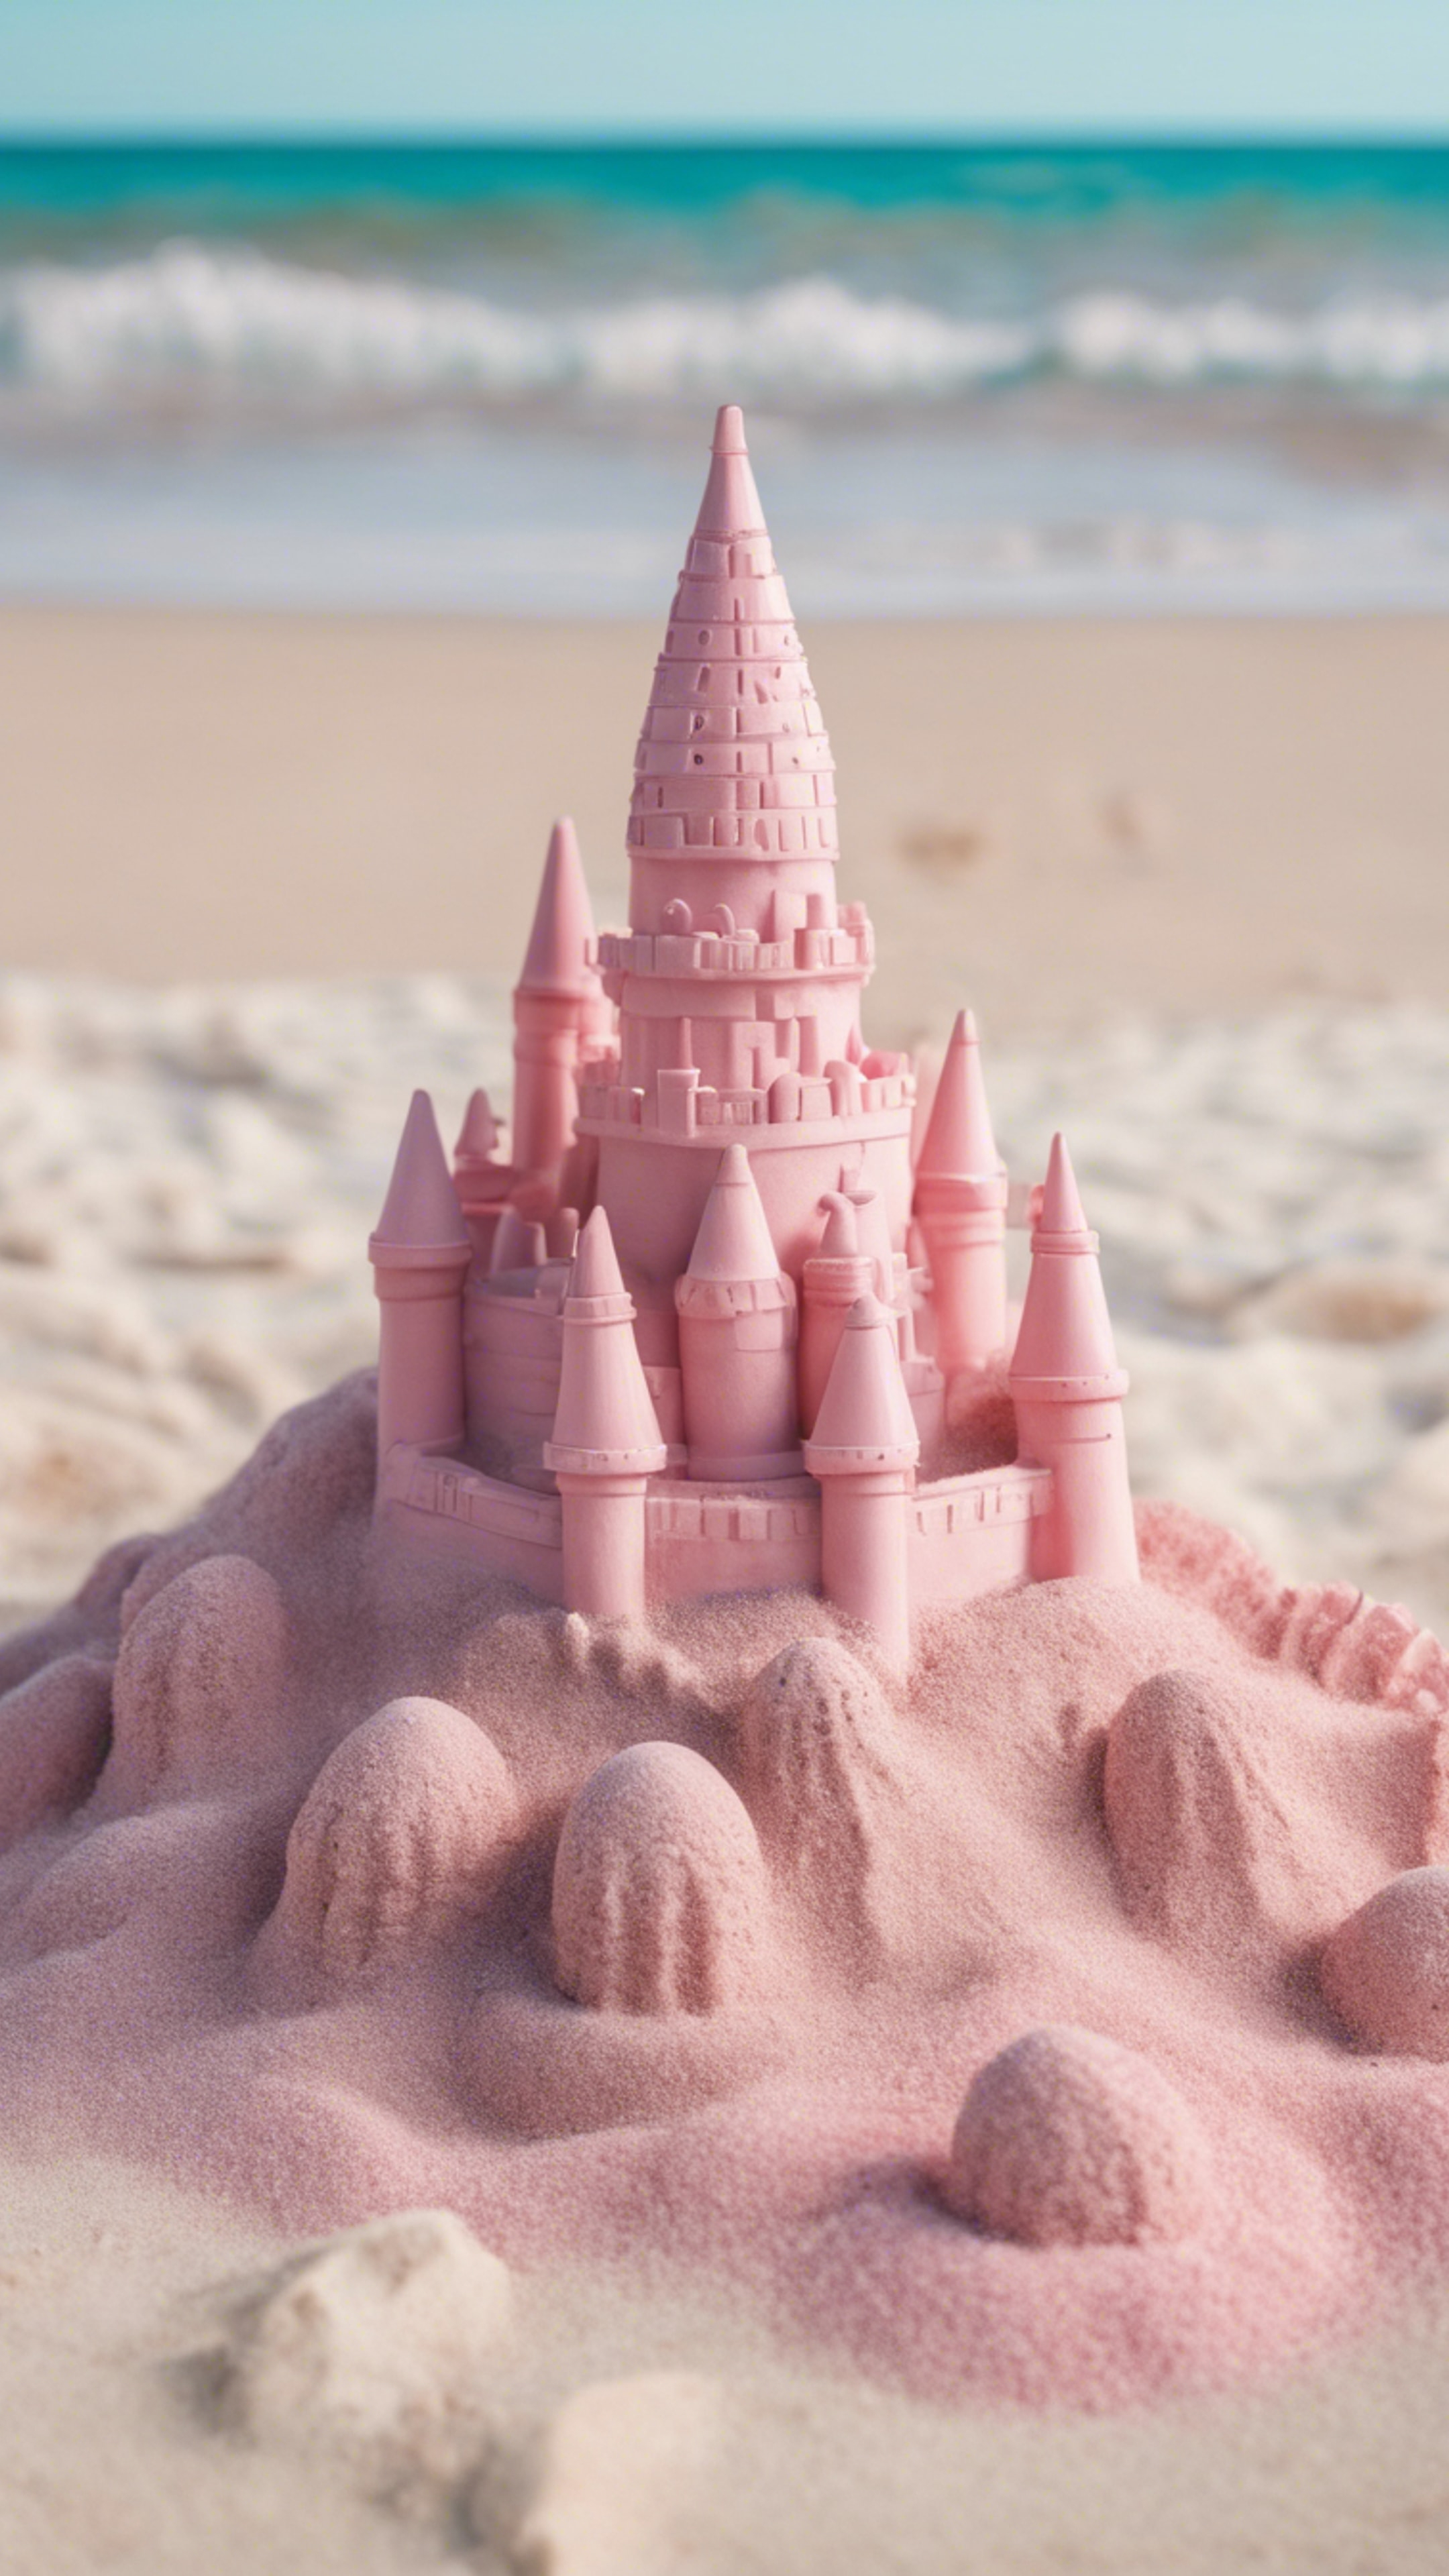 An intricate preppy pastel pink sandcastle on an idyllic beach with clear azure waters. Ფონი[55e256d408524d5fa872]